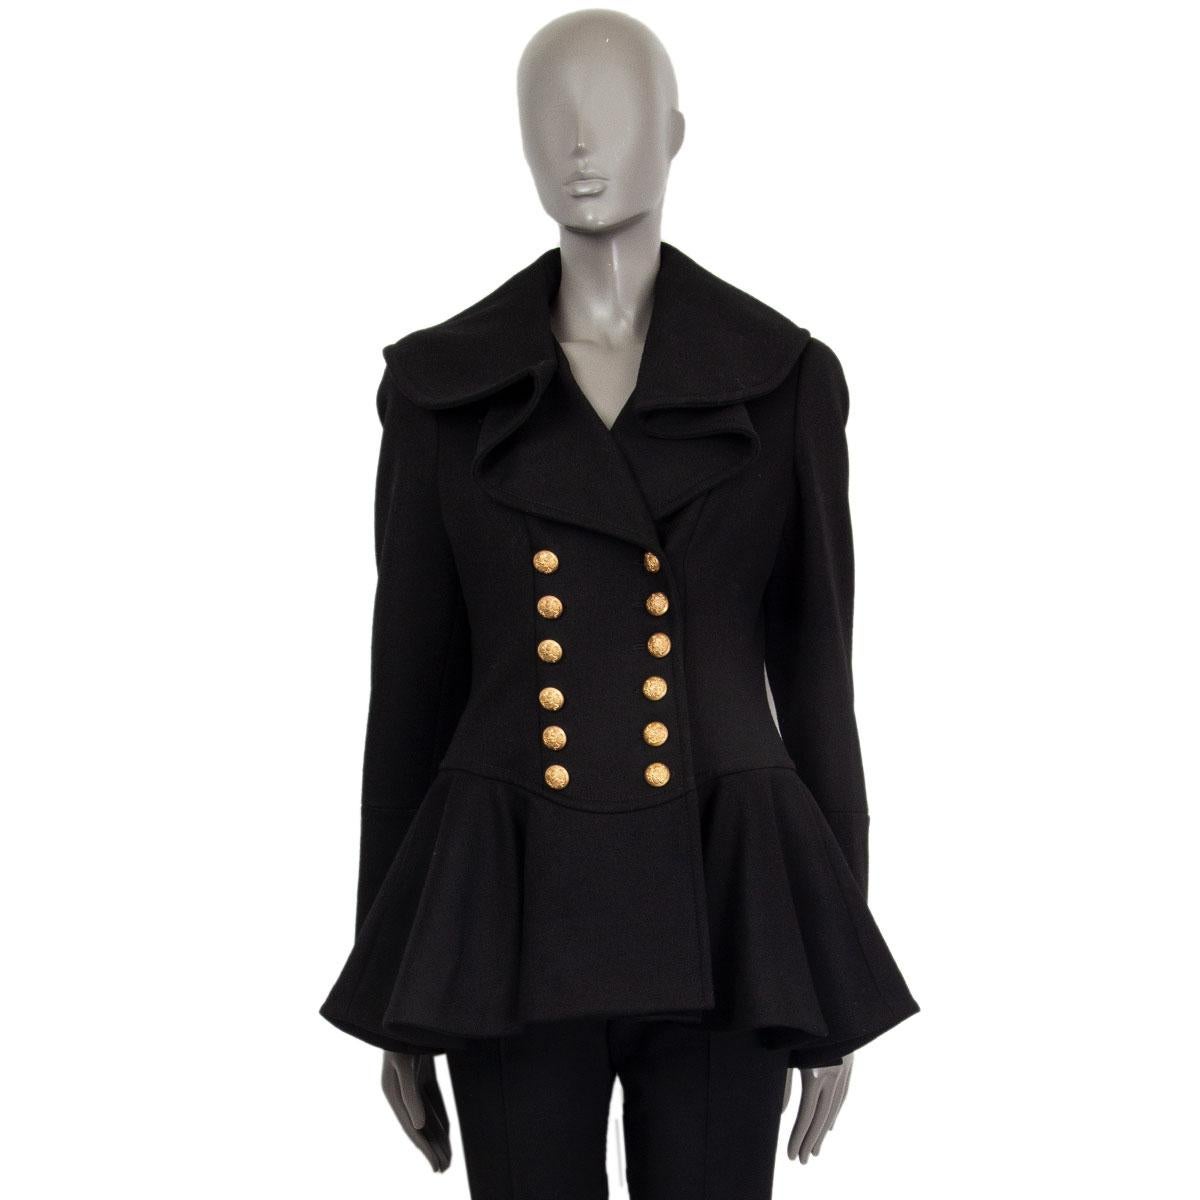 Alexander McQueen flared double breasted jacket in black wool (100%) with a ruffled wide collar and decorative gold tone embossed buttoned cuffs. Closes on the front with gold tone embossed buttons. Lined in cupro (59%) and viscose (50%). Has been